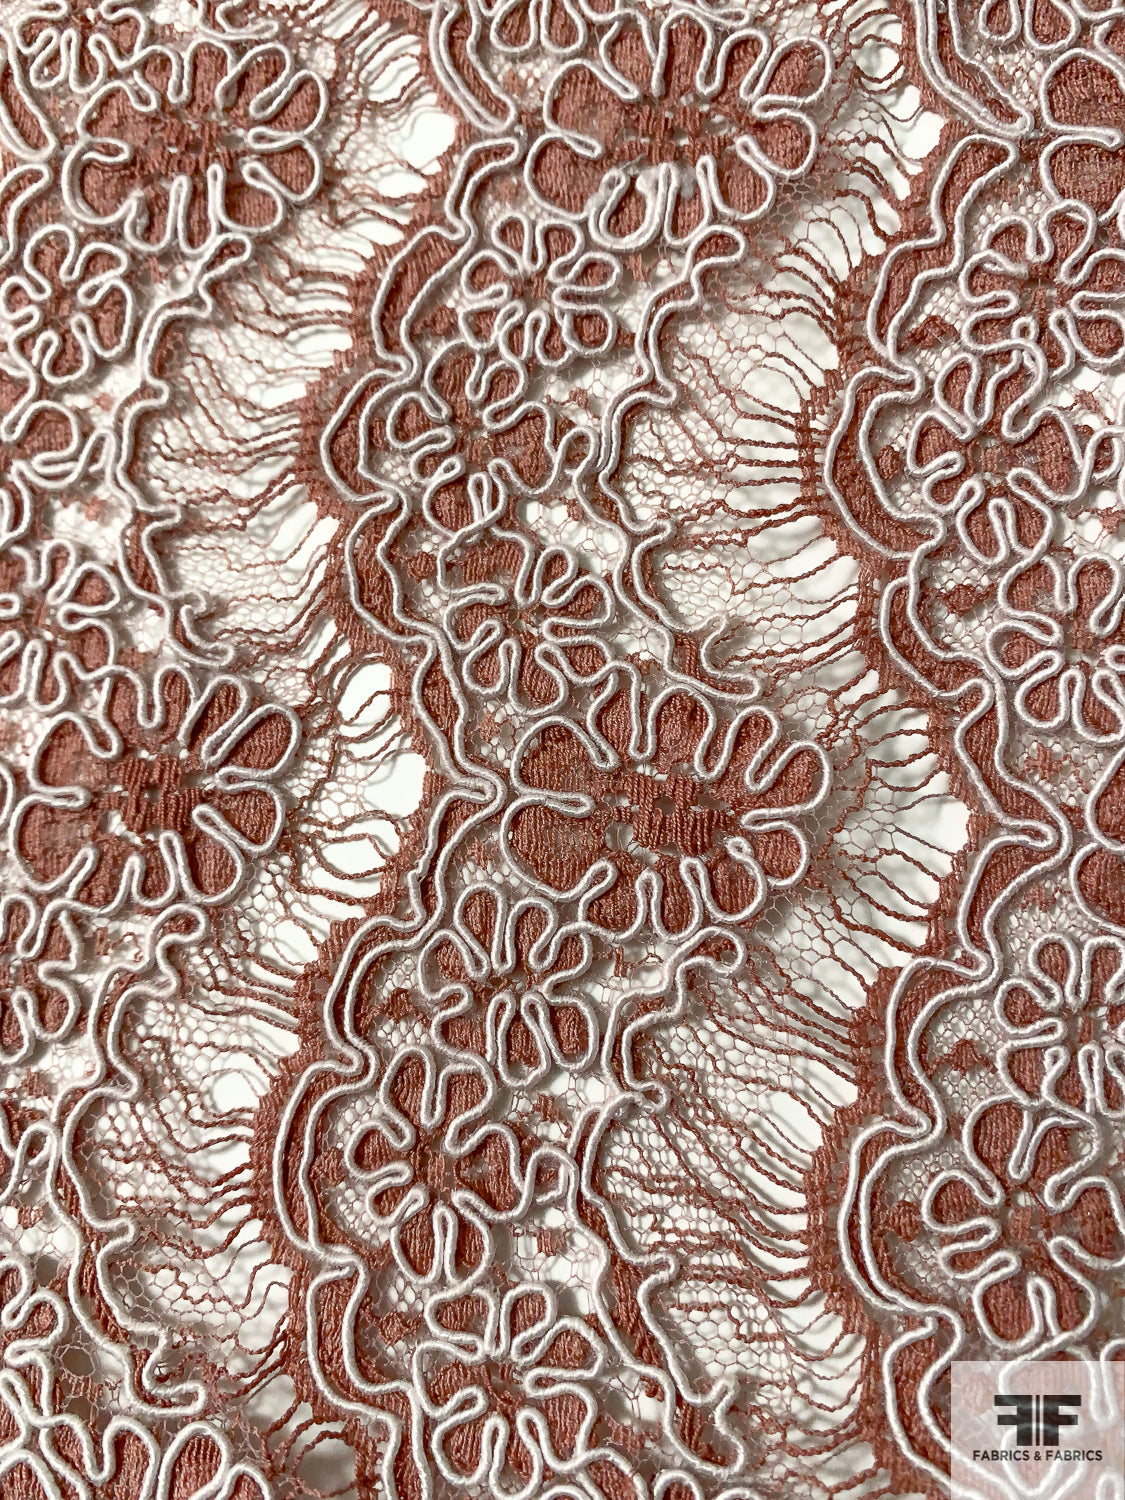 French Triple-Scalloped Floral Alencon Lace Trim - Dusty Mauve / Light Pink  - Fabric by the Yard